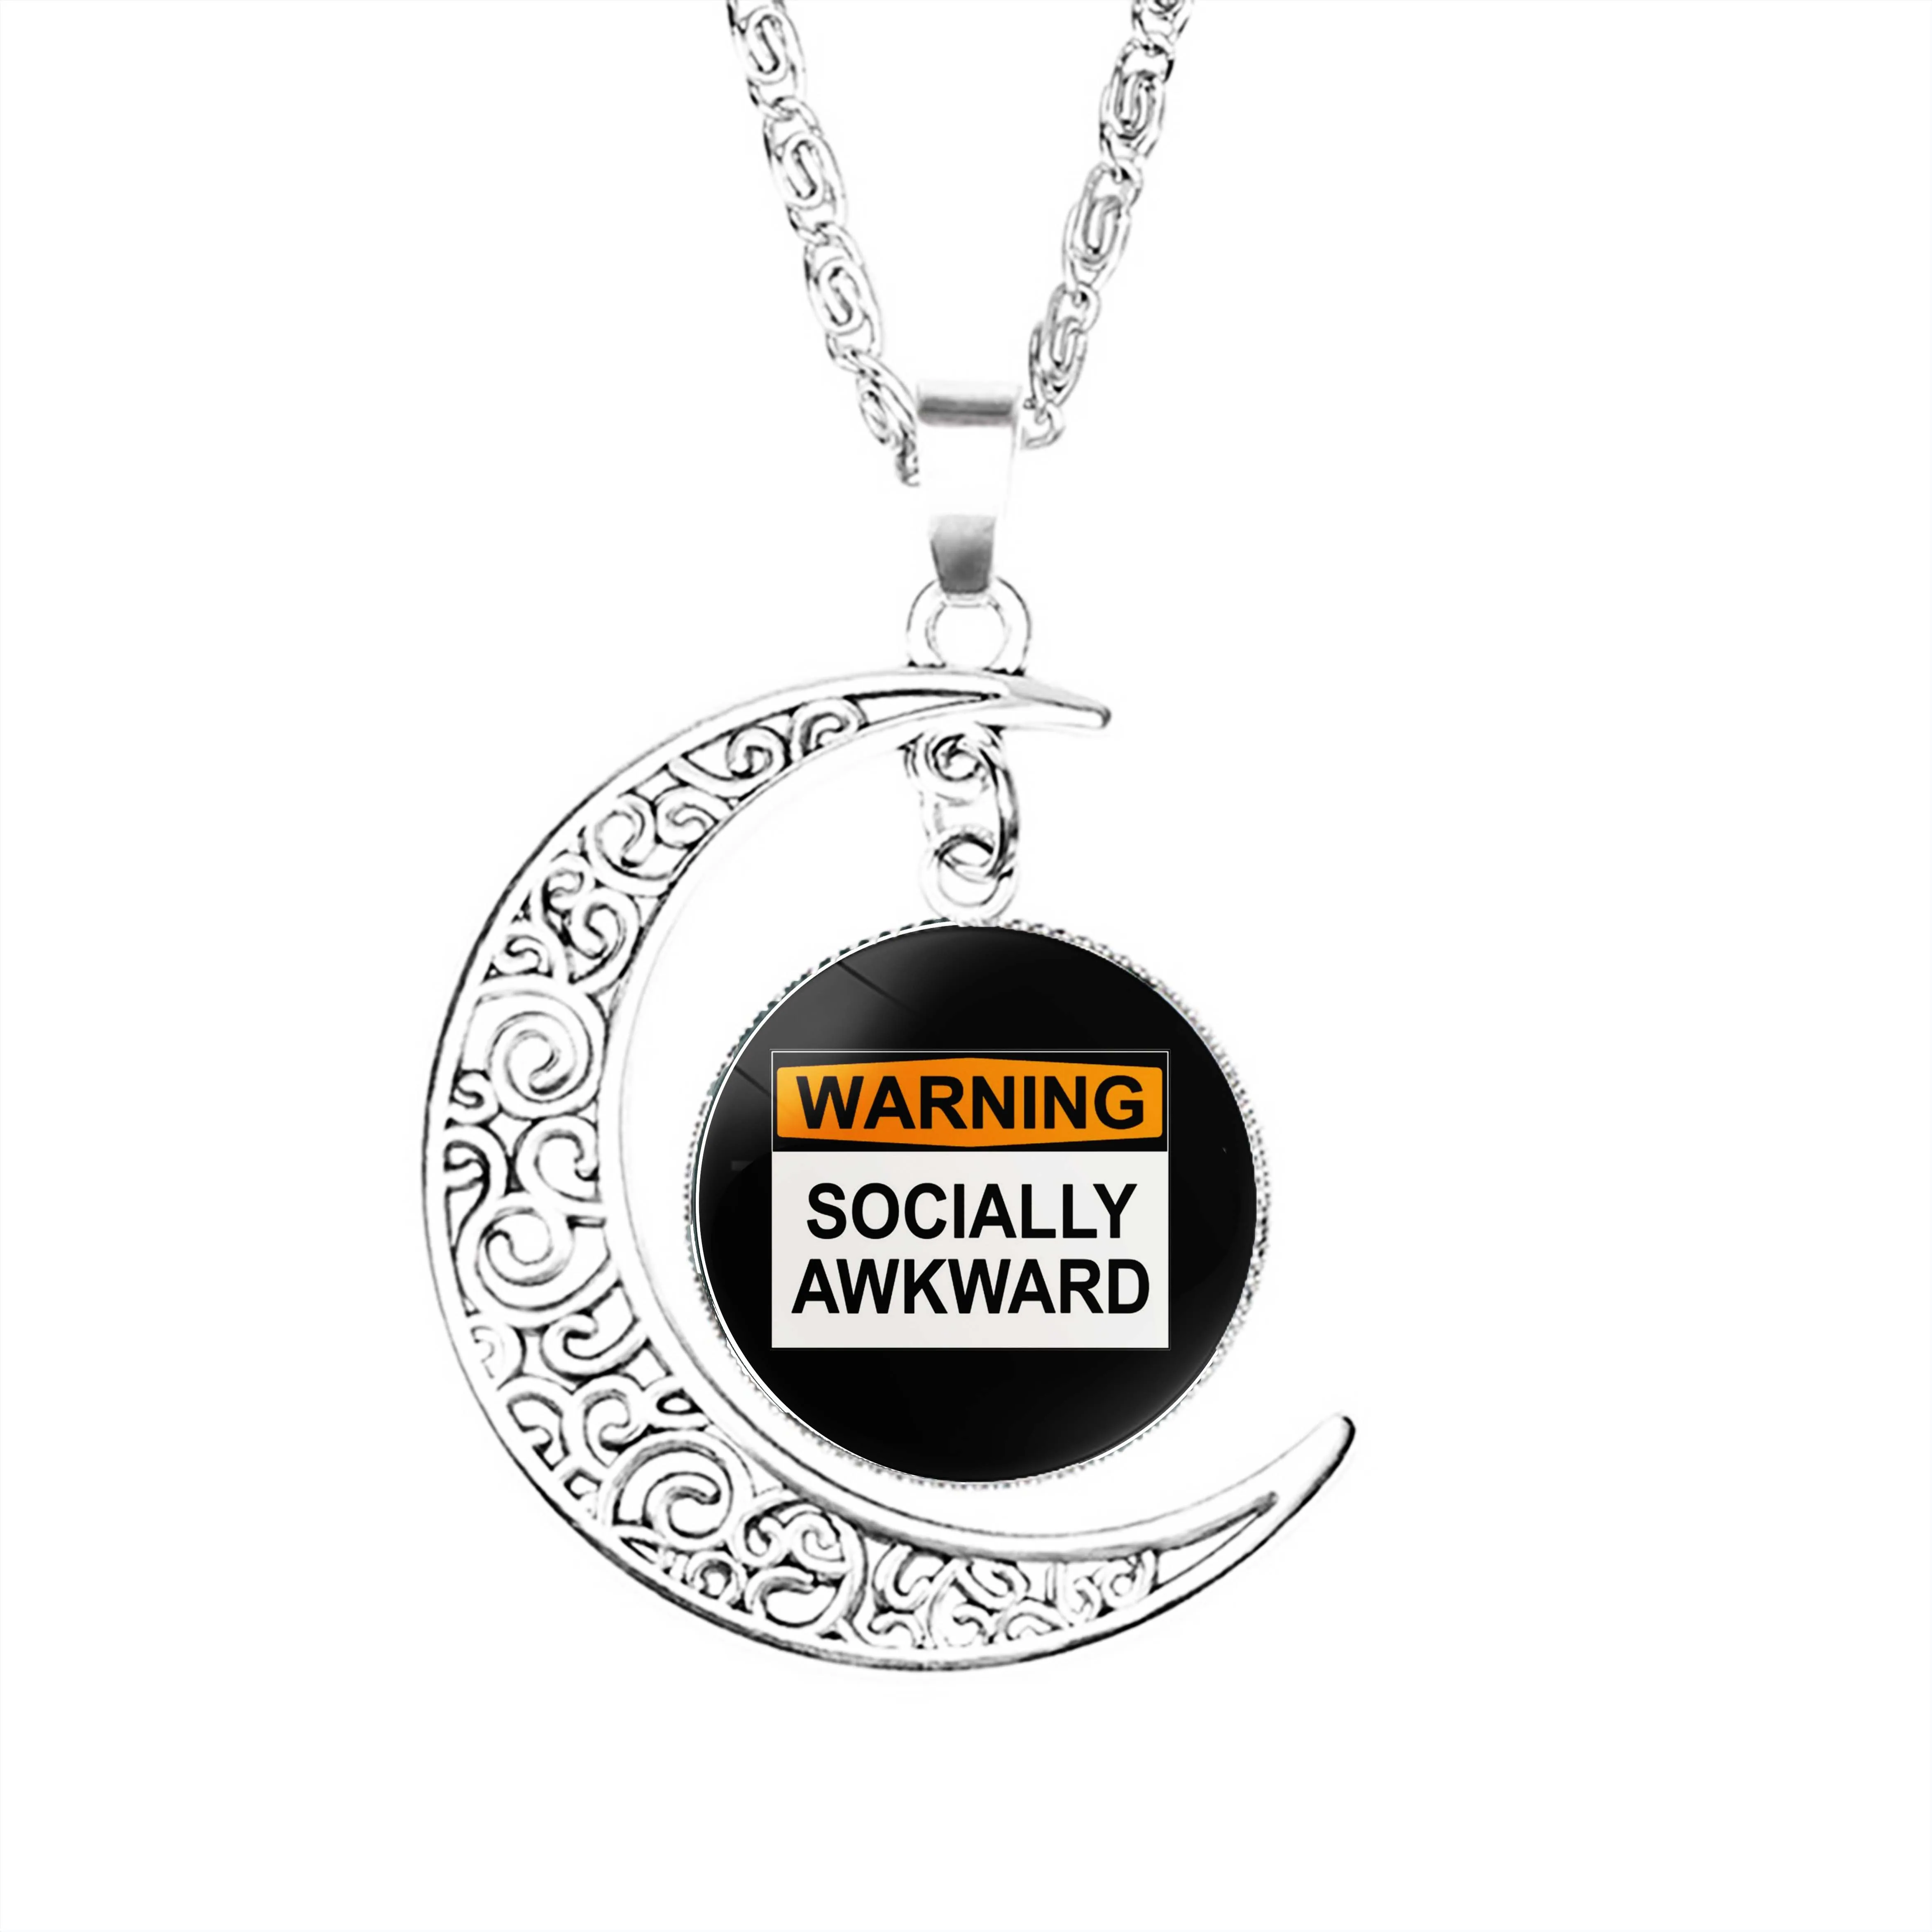 

Warning Socially Awkward Moon Necklace Boy Glass Lady Fashion Crescent Jewelry Lovers Men Chain Gifts Girls Charm